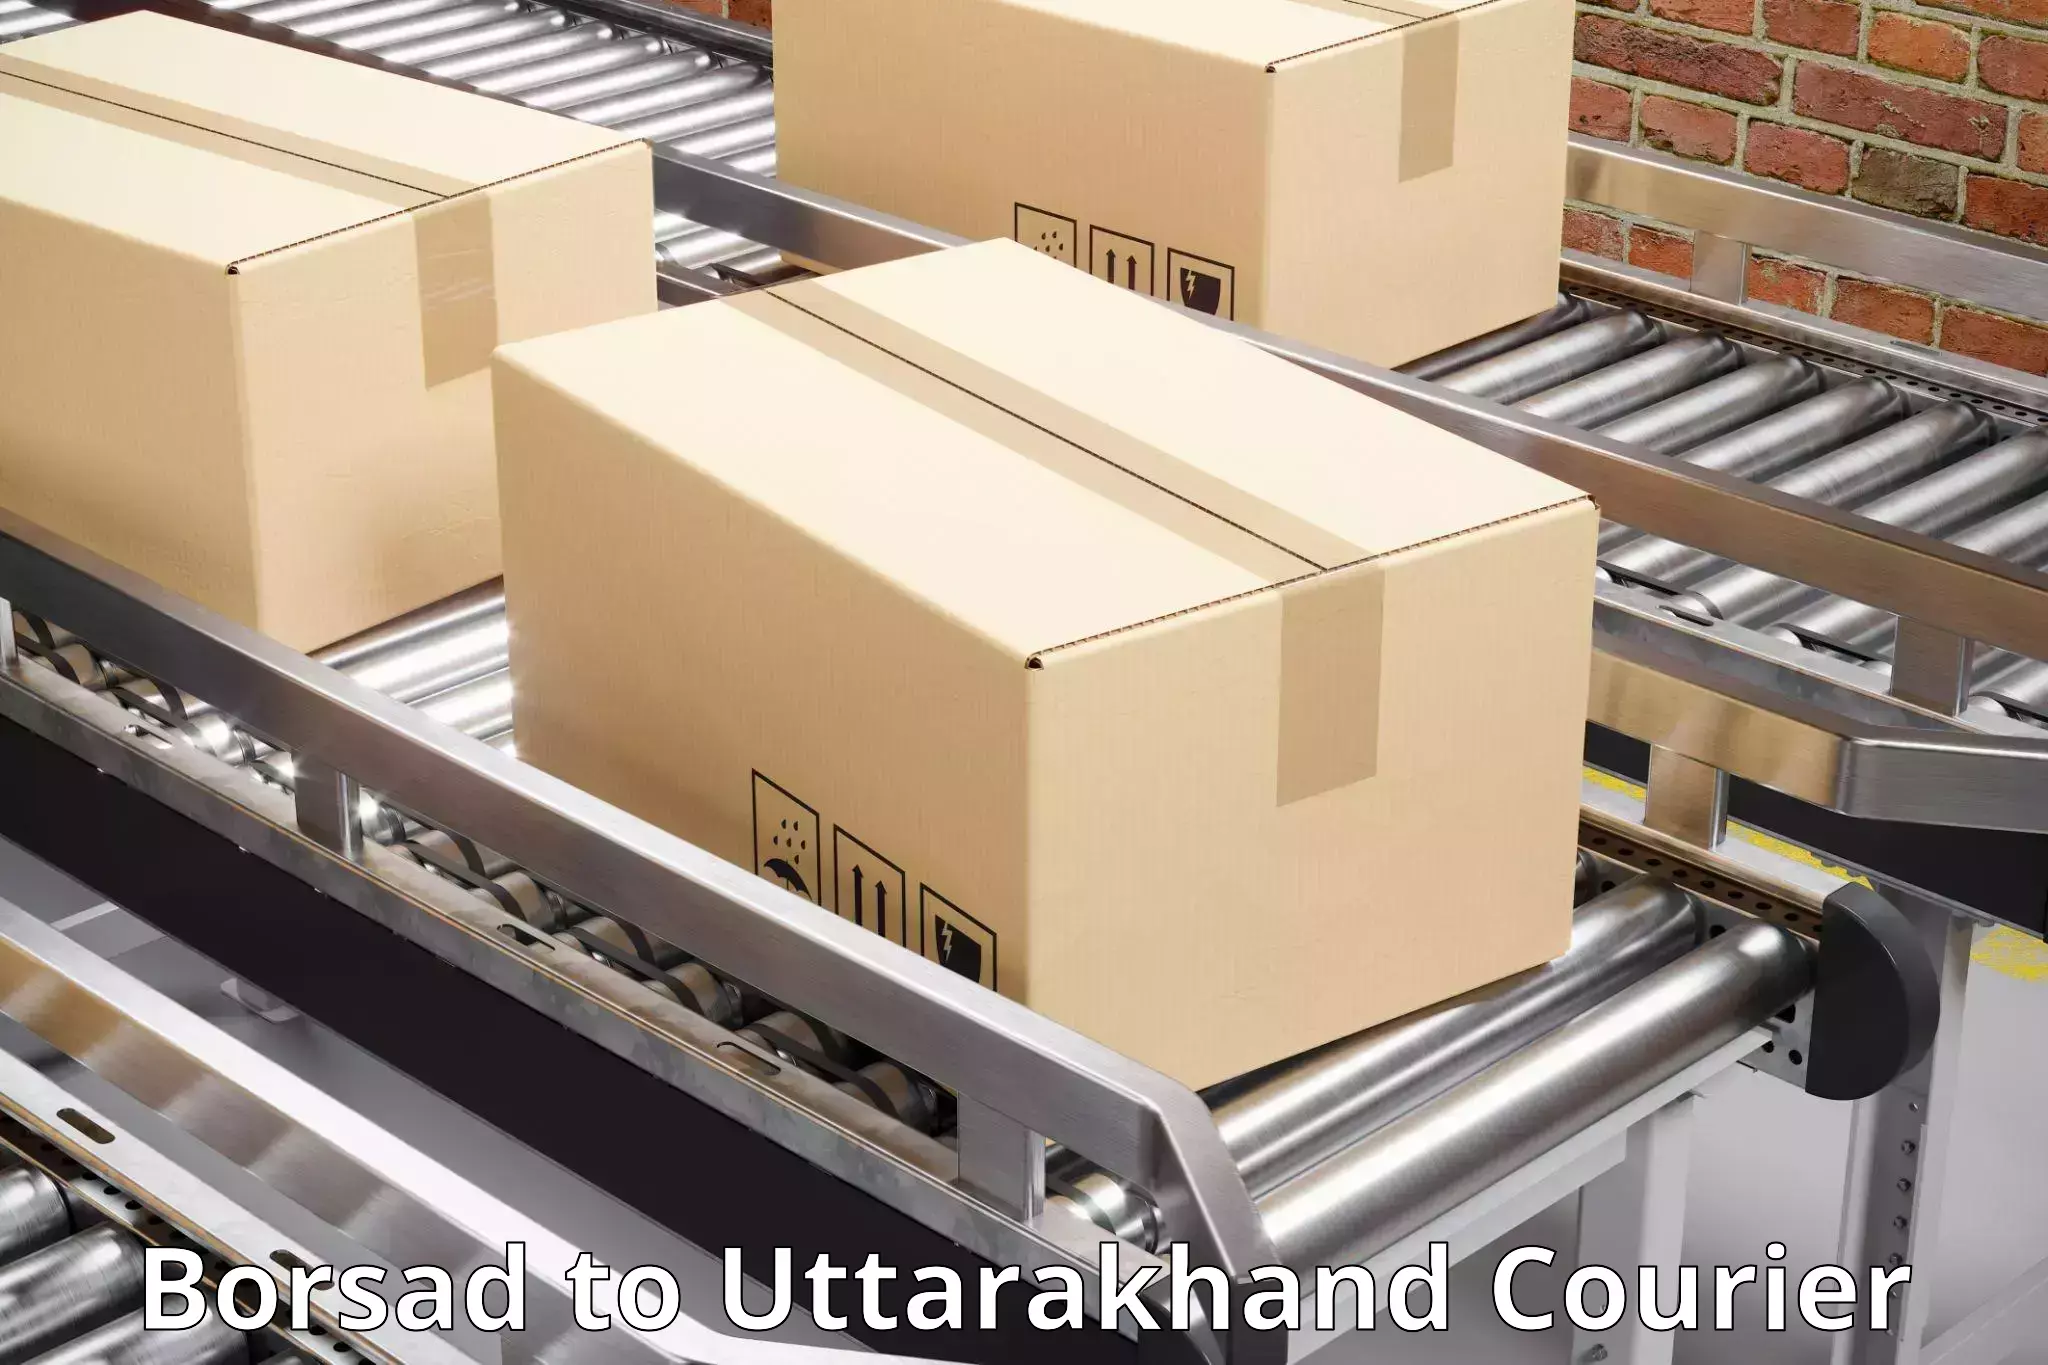 Courier service partnerships Borsad to Roorkee